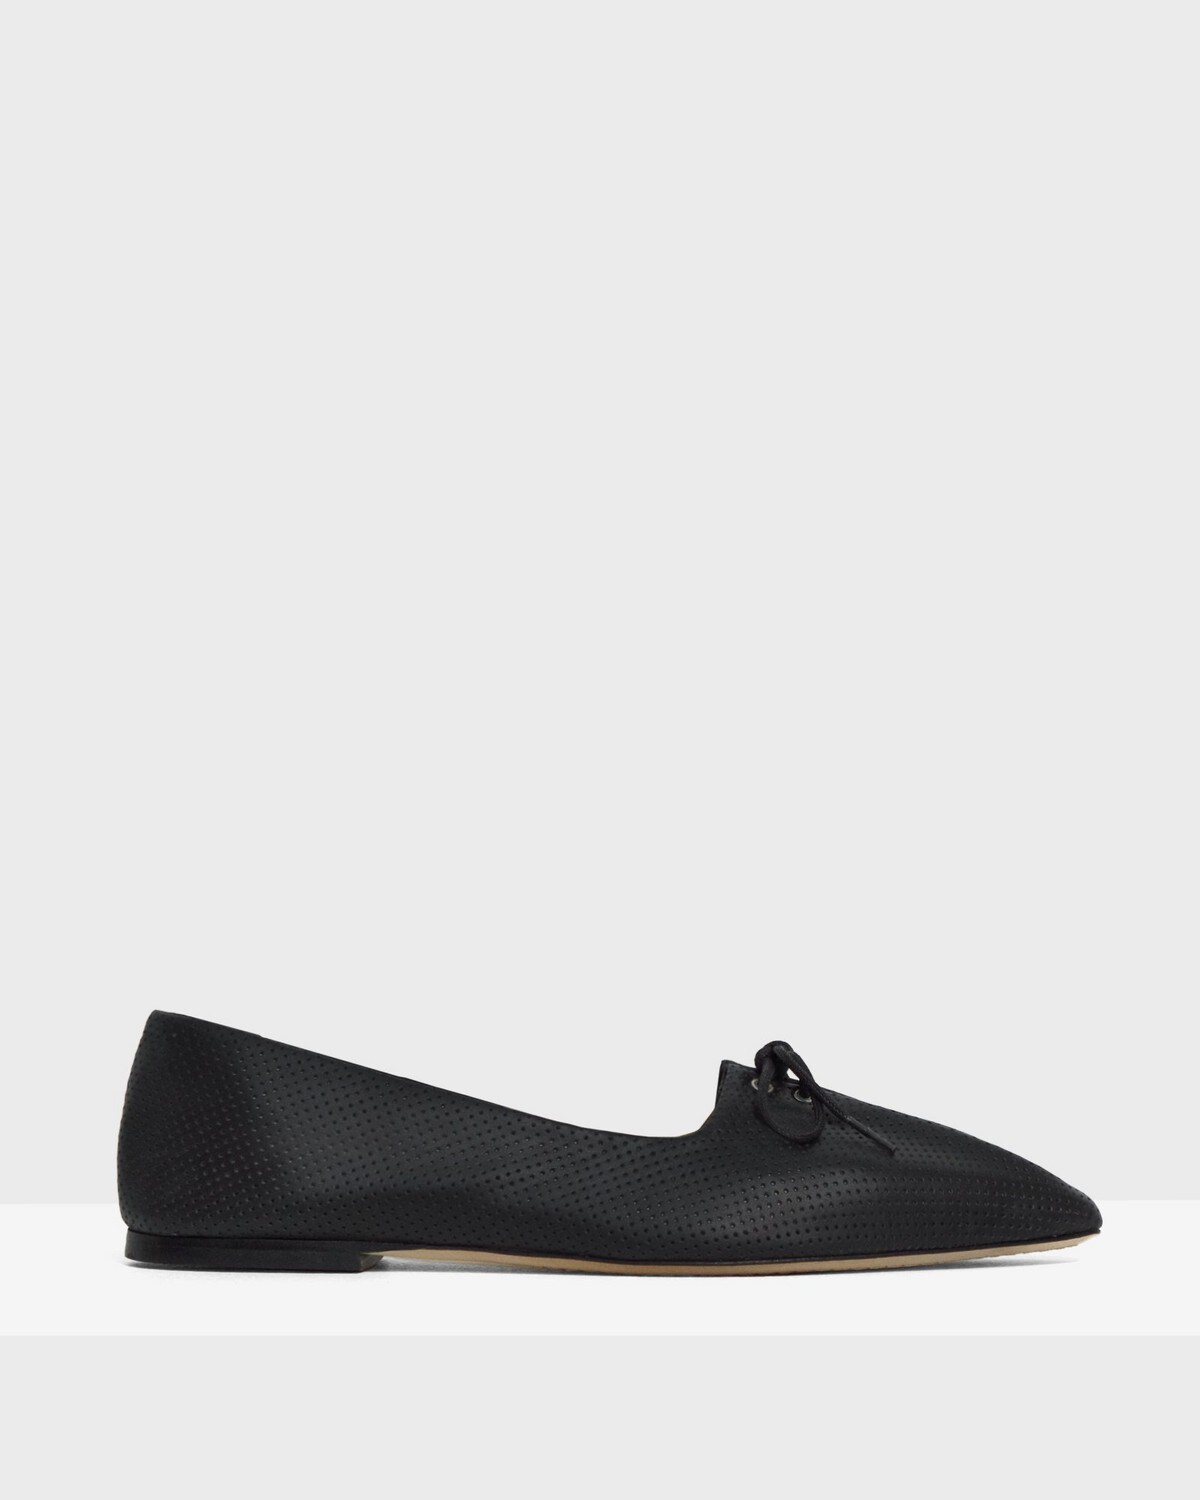 Pleated Ballet Flat in Perforated Leather